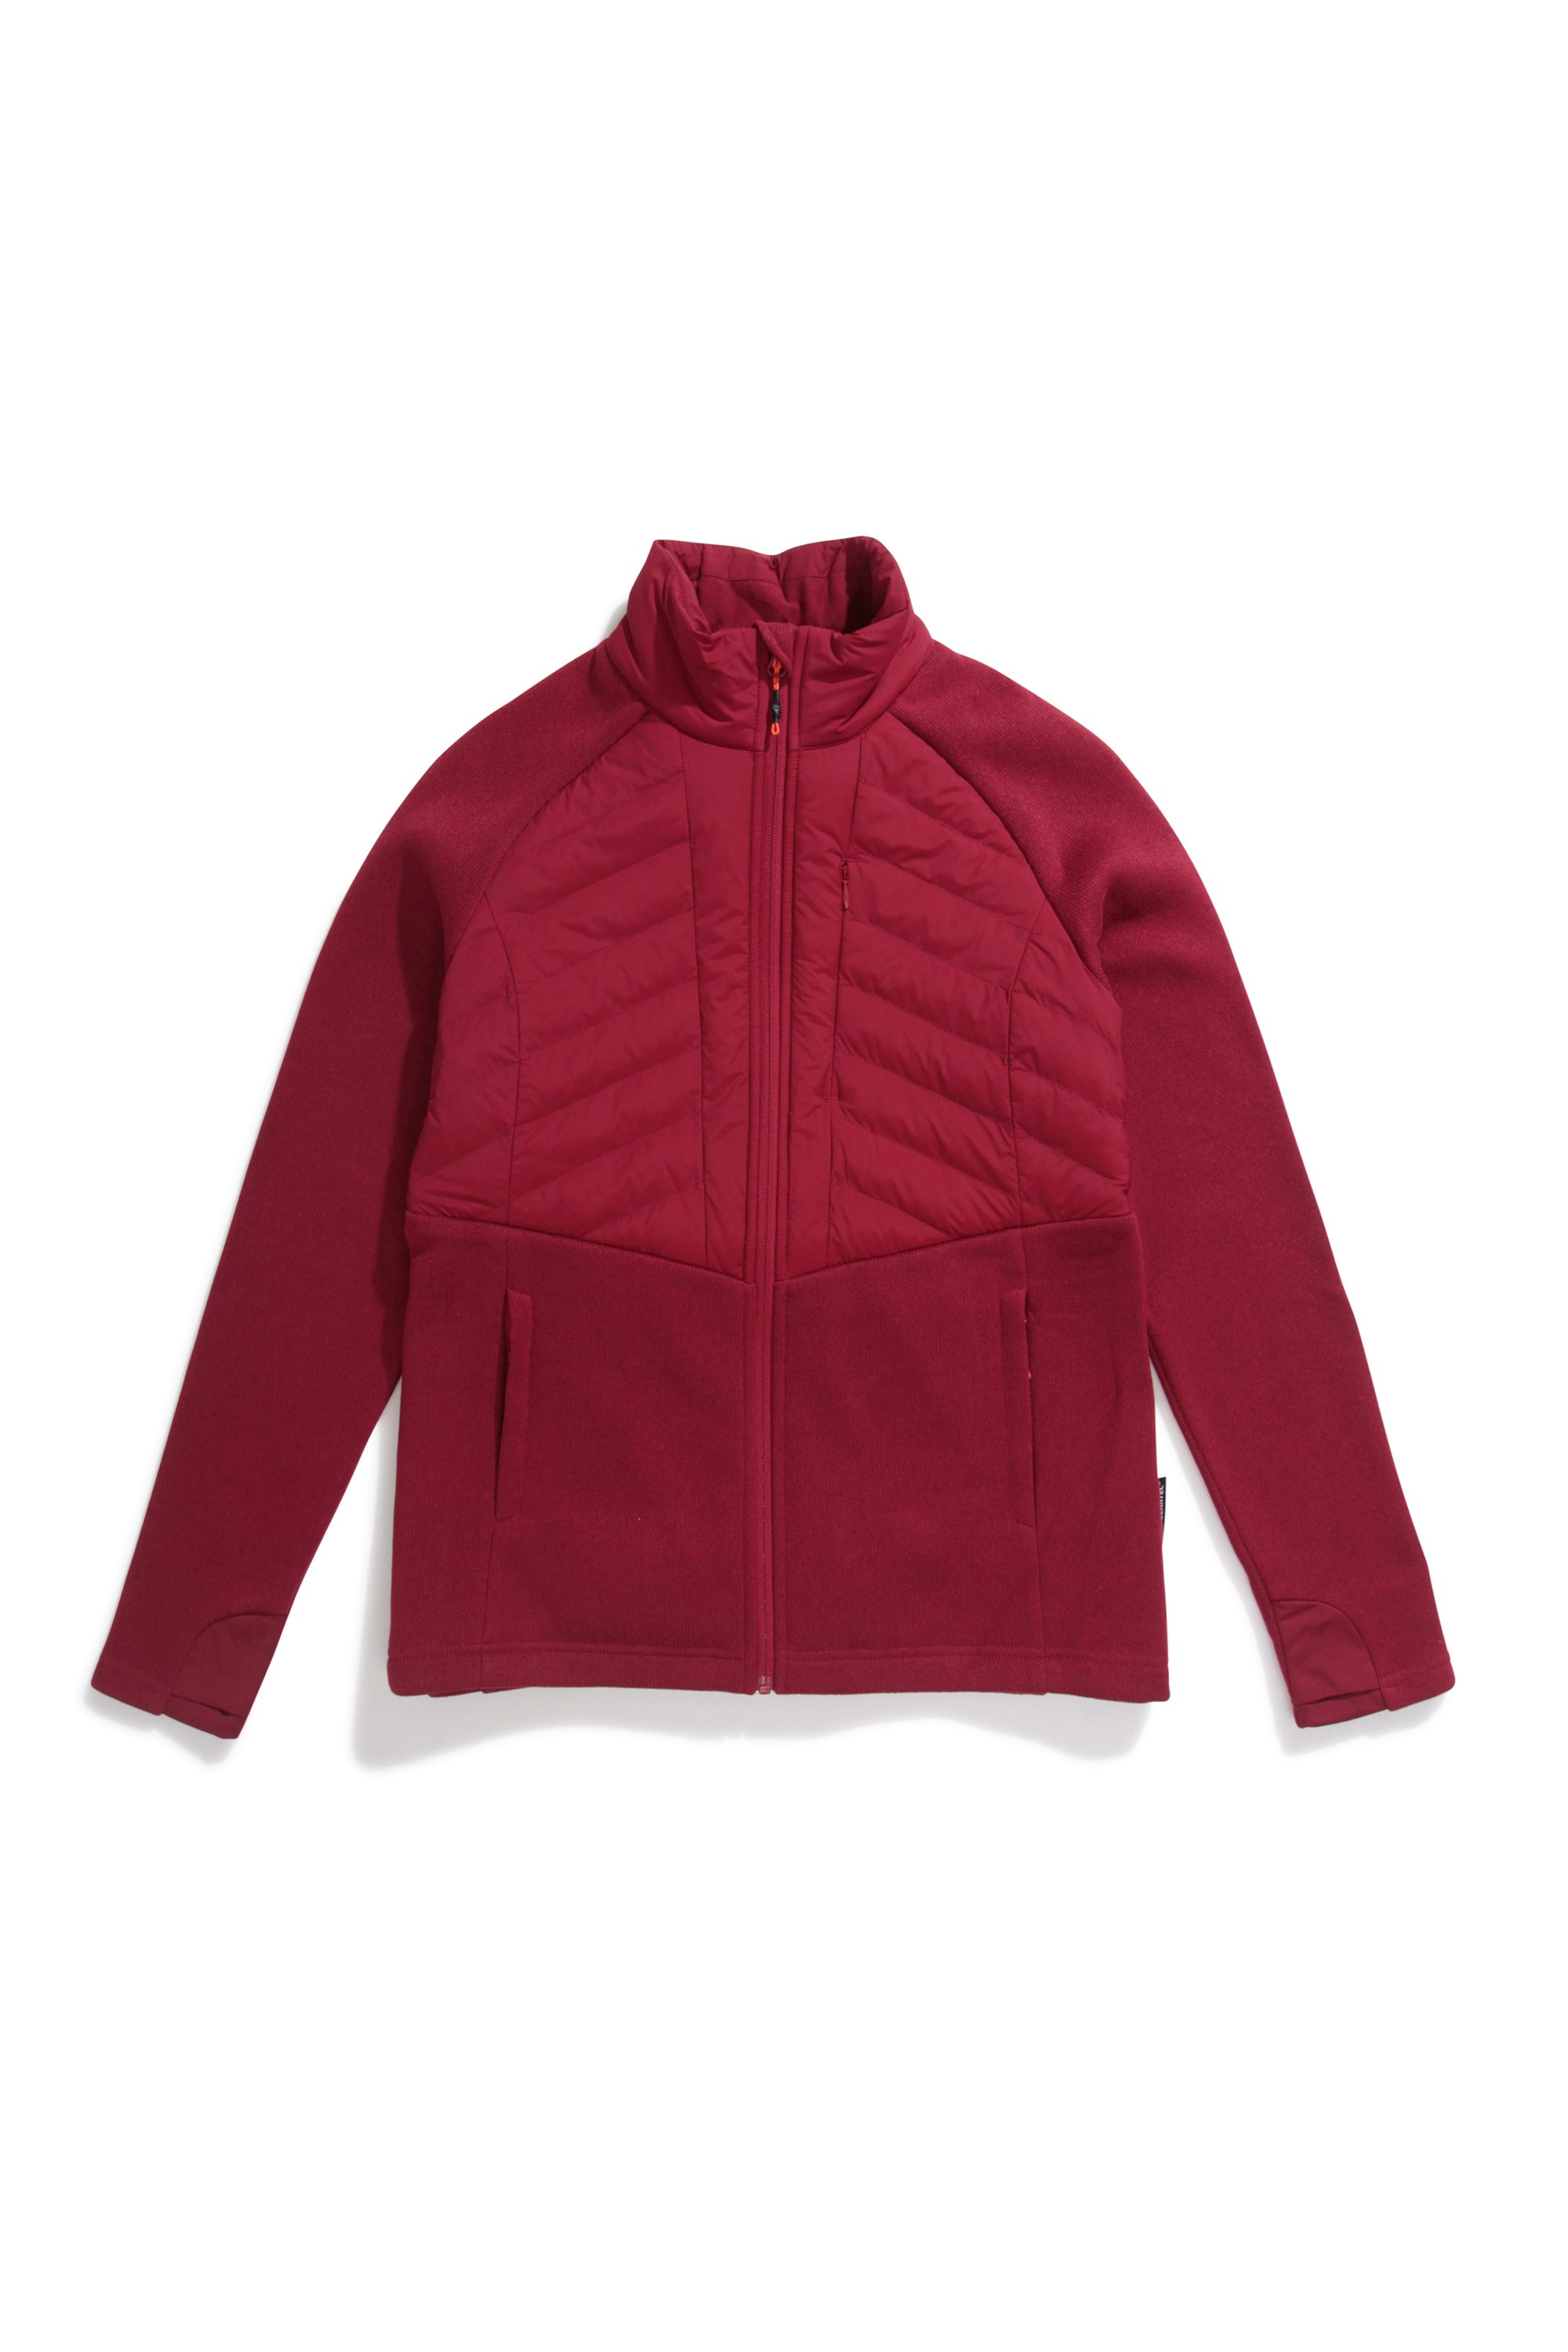 Ultra Everest Womens Thermal Pro Fleece - Red